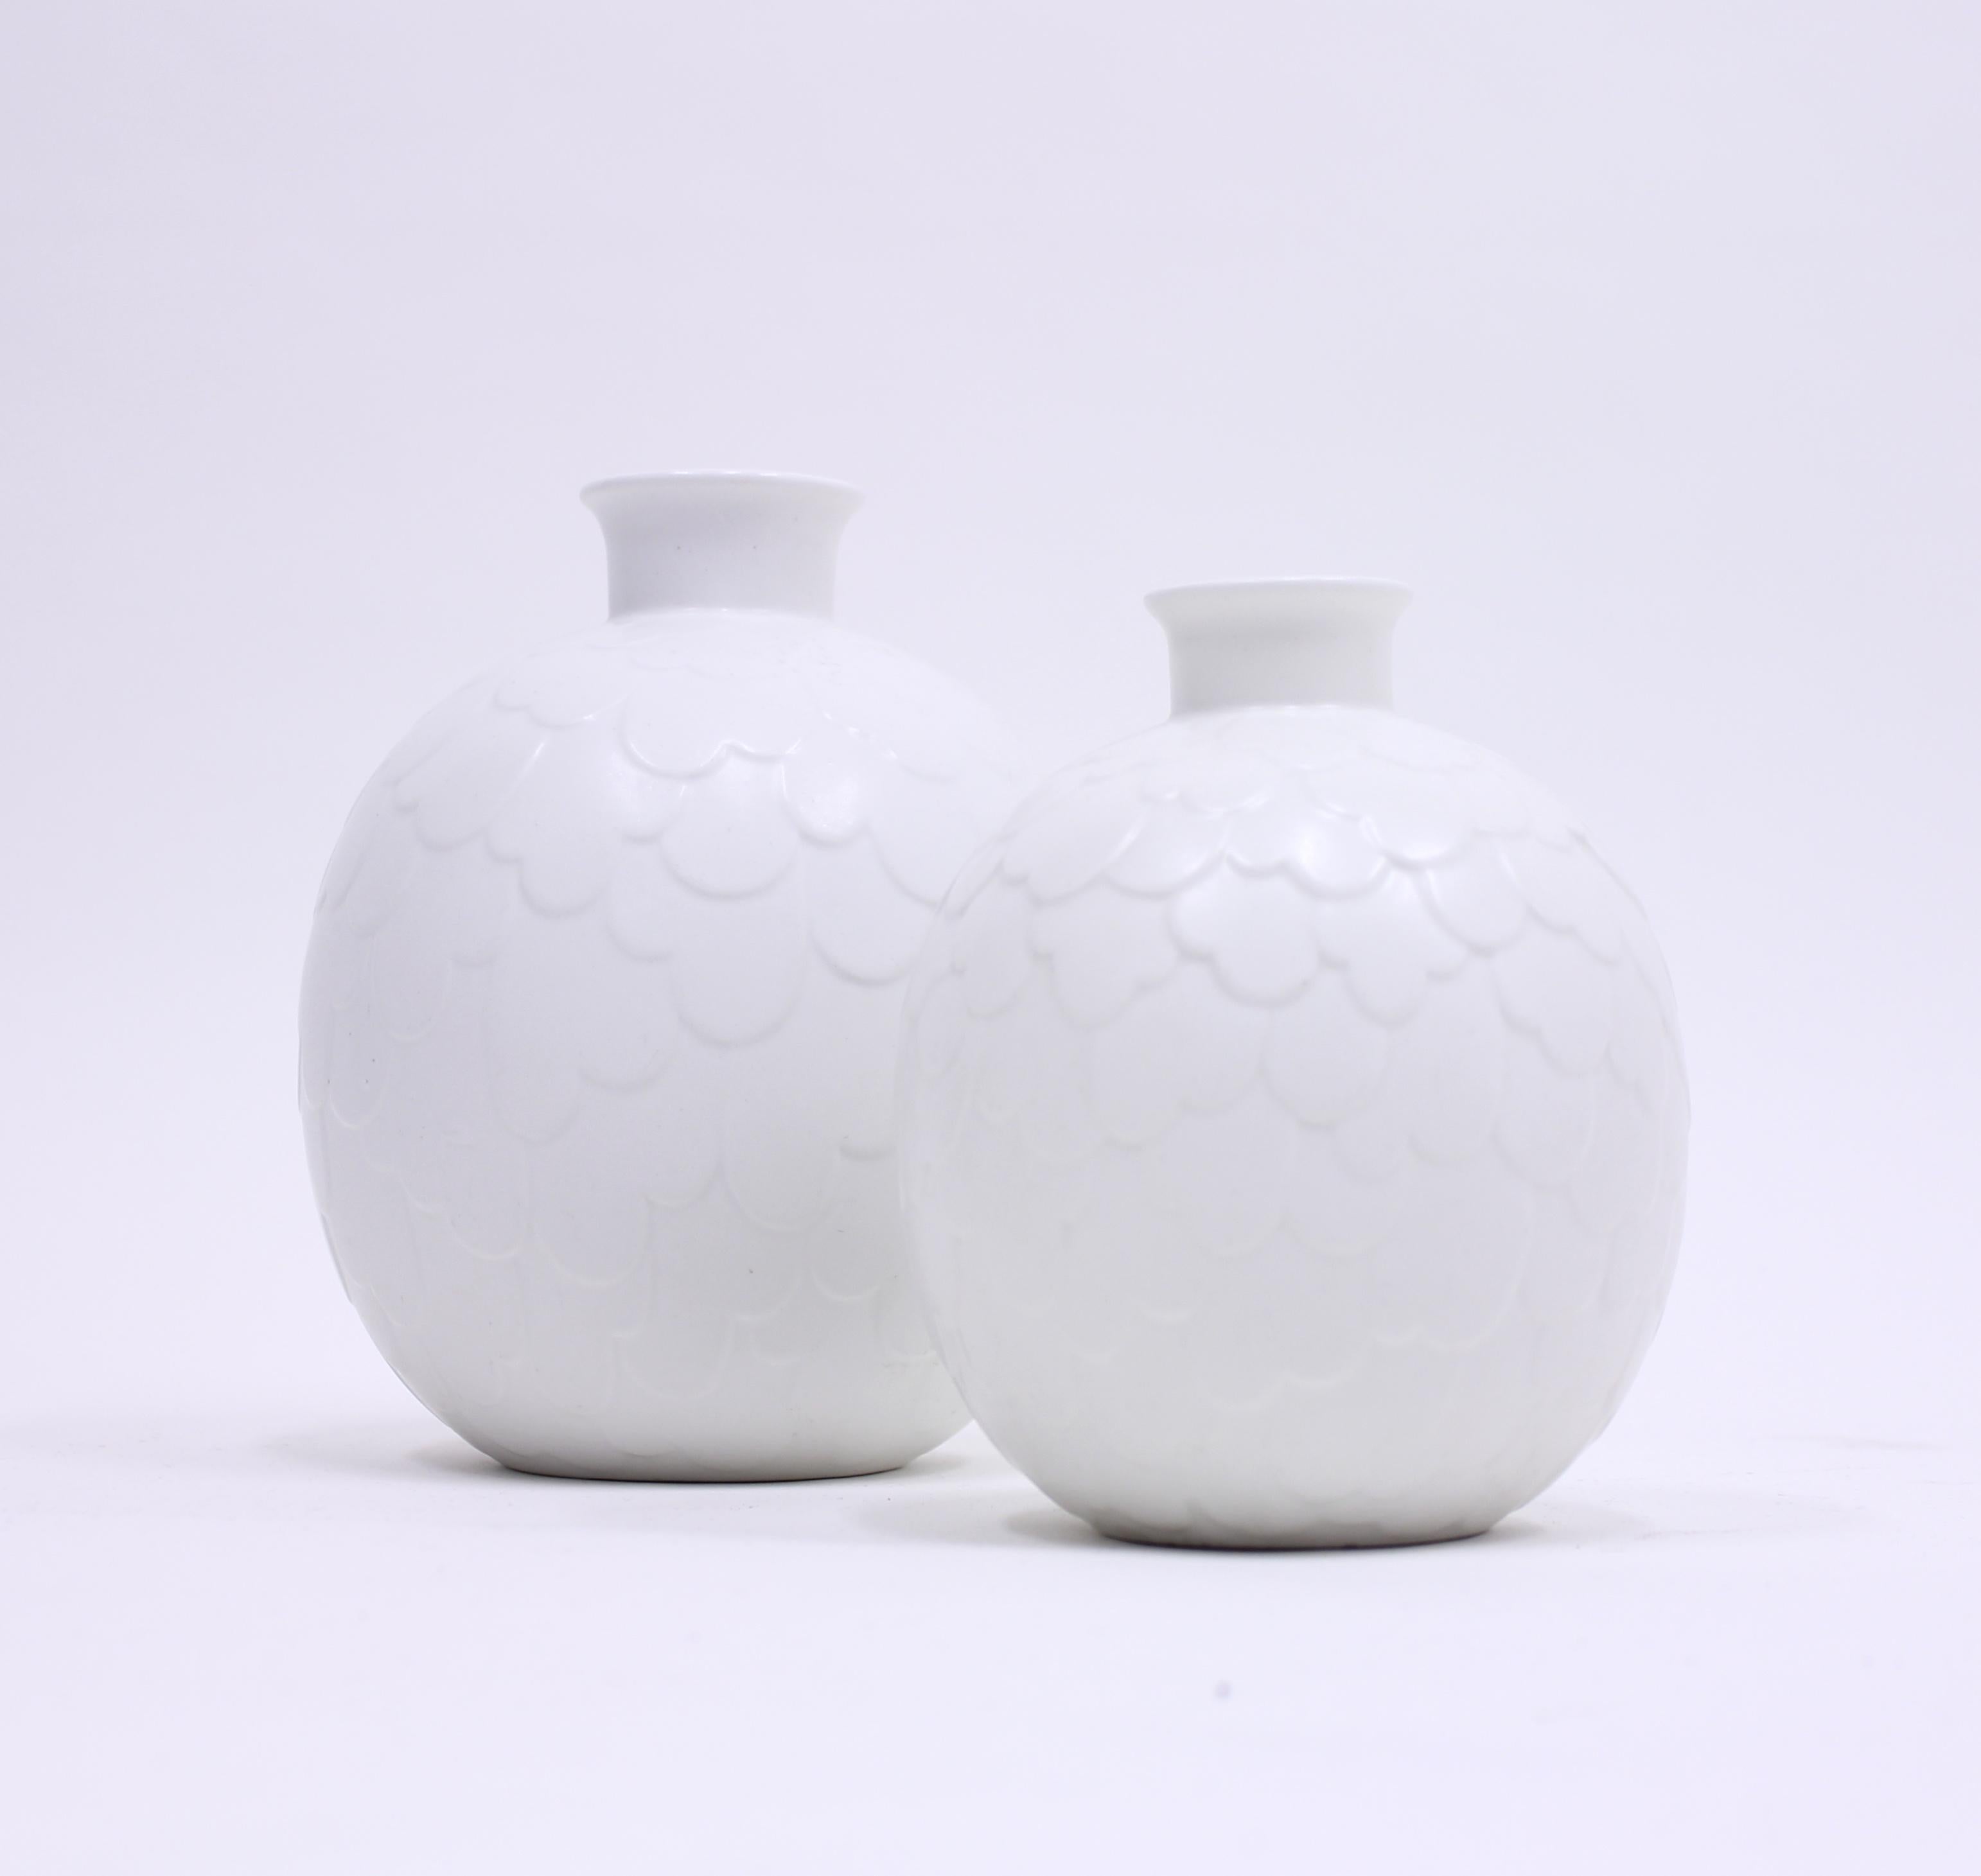 Rare set of 2 vases from the Capri series designed by Gertrud Lönegren for Swedish manufacturer Rörstrand in the 1950s. The vases are in two different sizes. The smallest are 17 cm high and have a diameter of 14 cm. The larger one is 22 cm high and